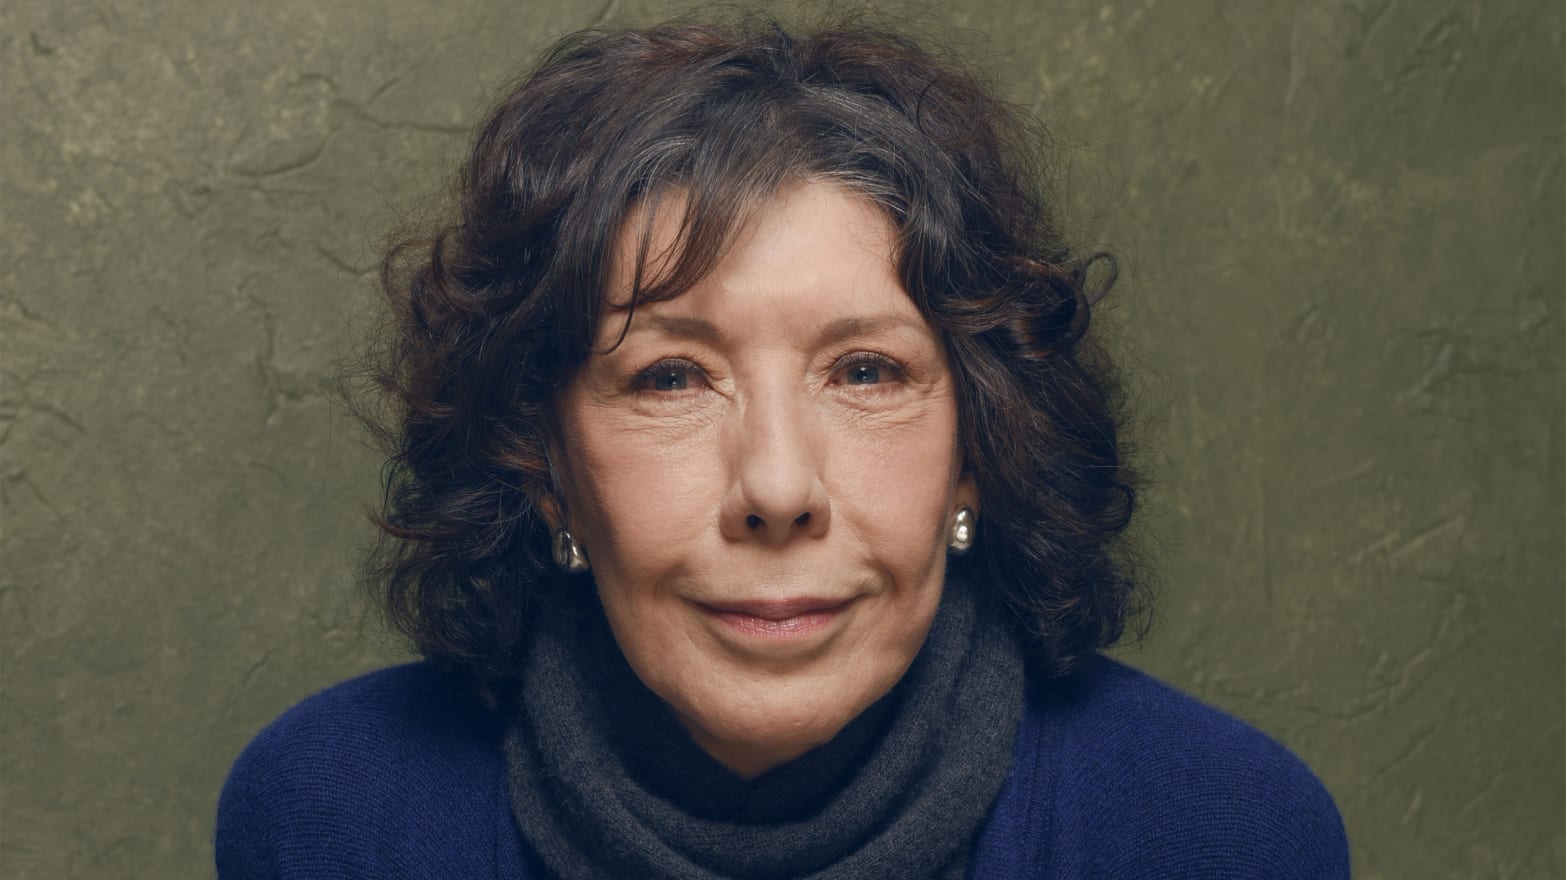 Of lily tomlin images Lily Tomlin